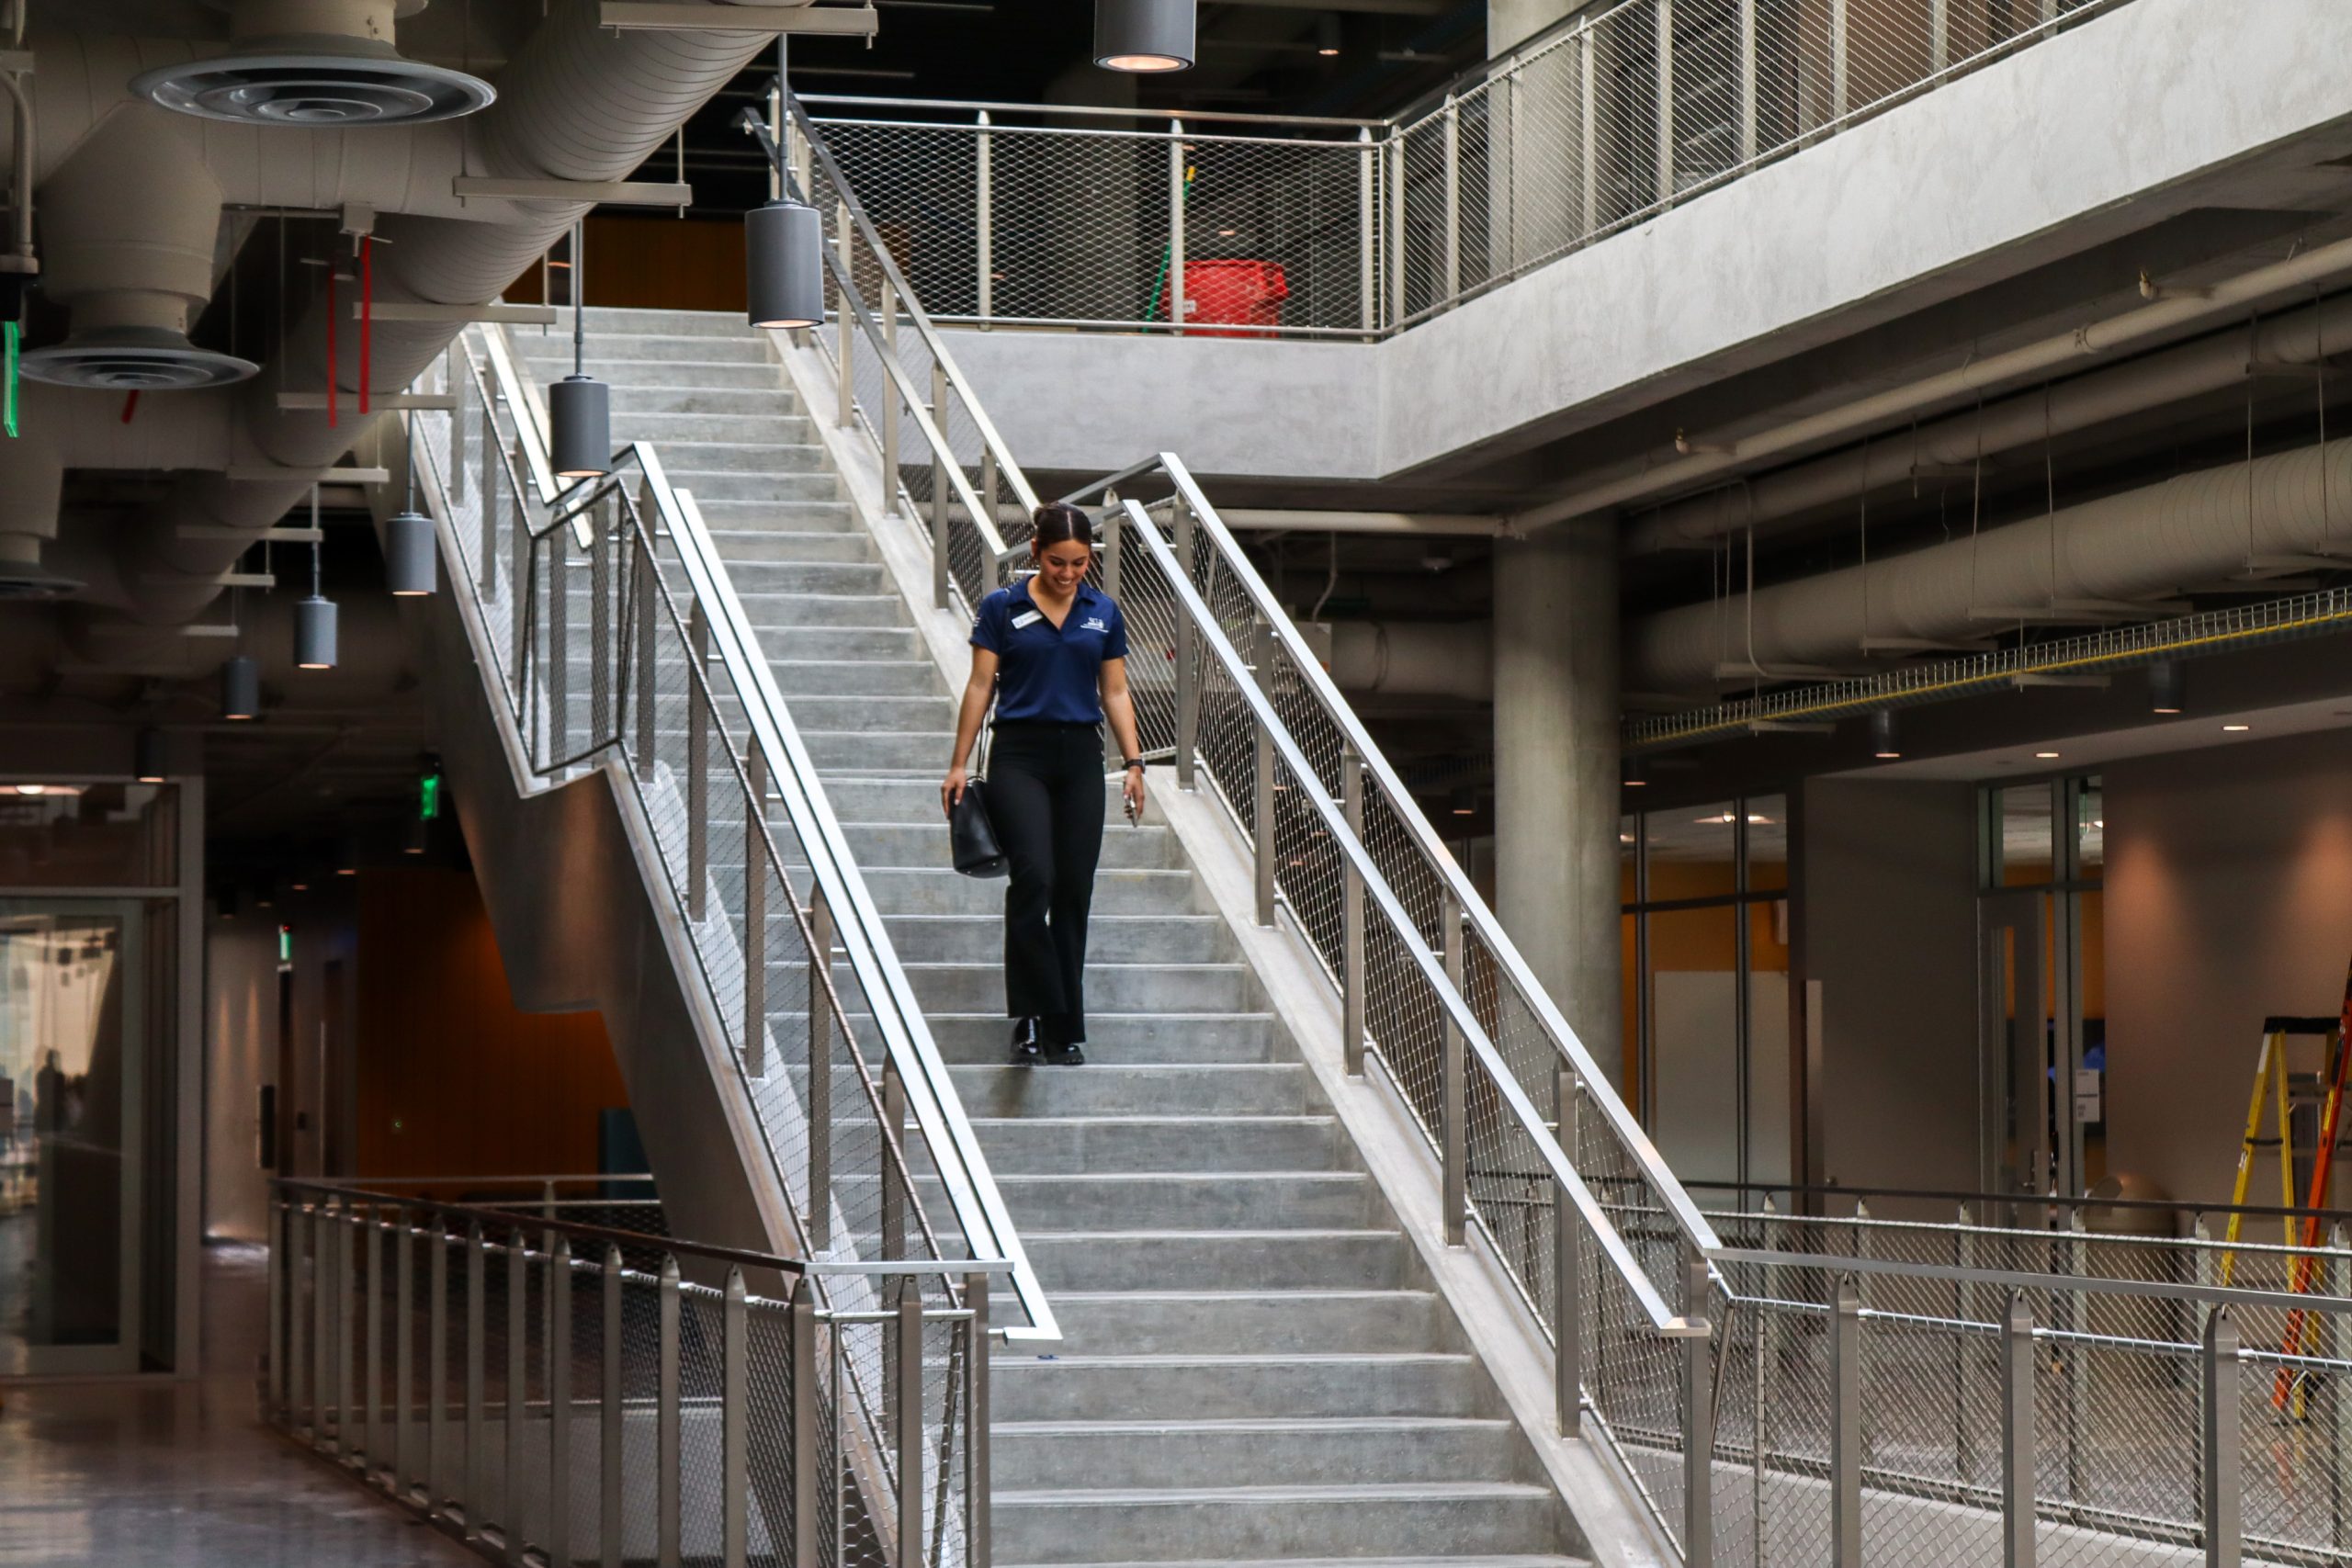 Hope Smith/The Collegian NW student and senate chair of NW SGA Mia Carrizales walks down a set of stairs in NW01 during the tour.